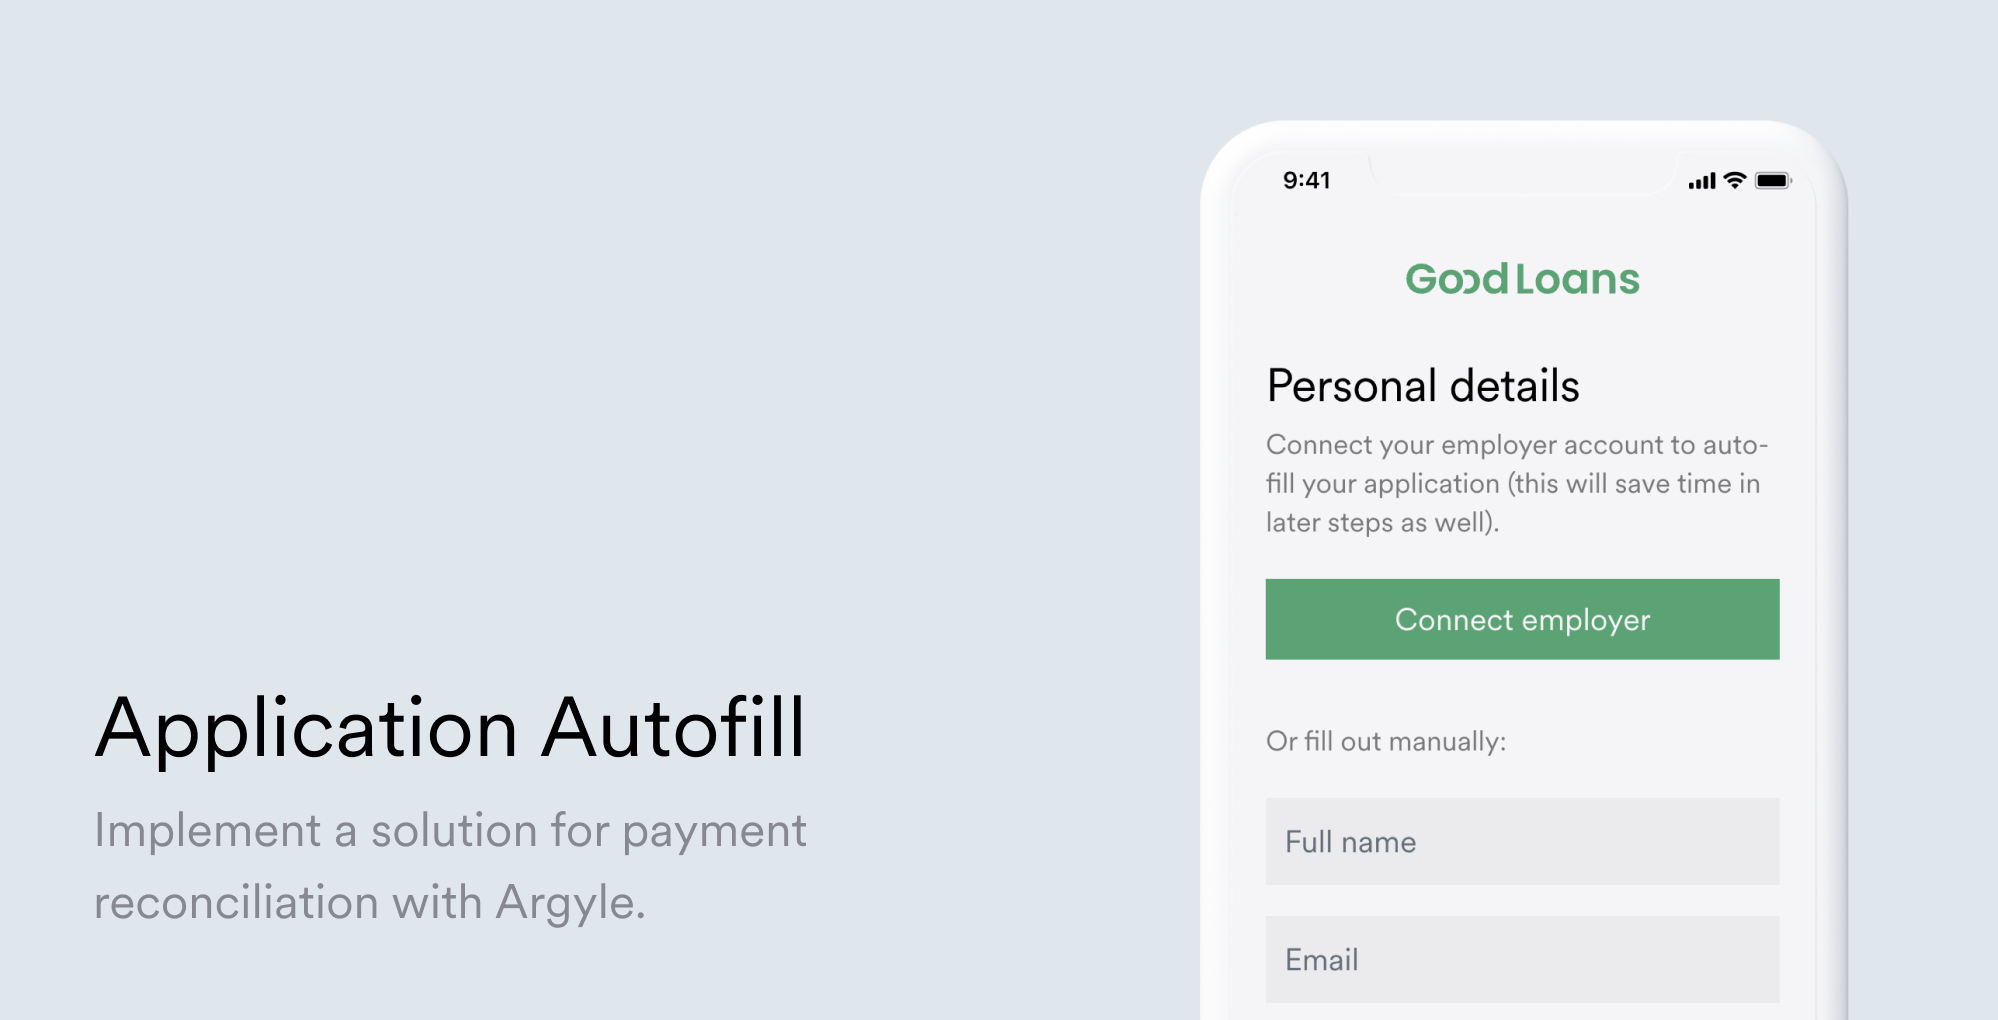 Use Argyle to autofill applications that require profile, income, employment, or deposit information from your users. Instead of filling out form fields like name, date of birth, current employer, etc. manually, users can connect their employment account.